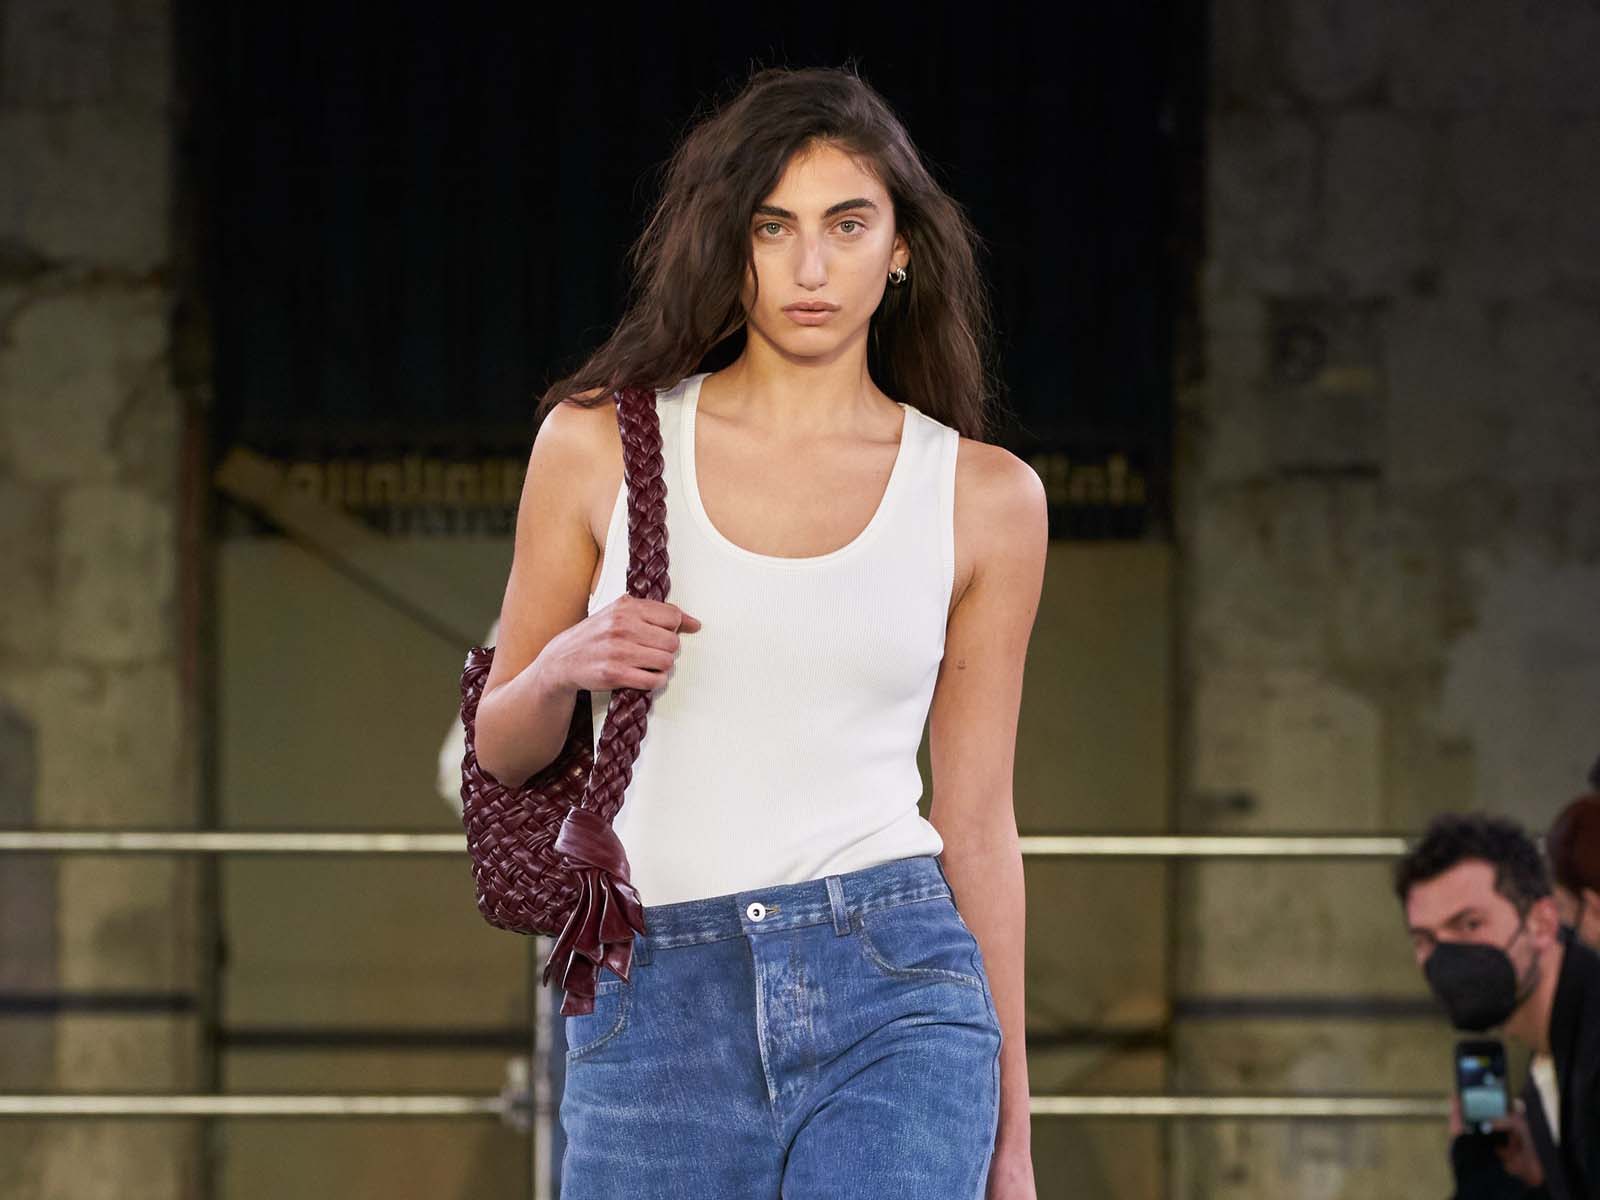 This is one of the most repeated trends at fashion week